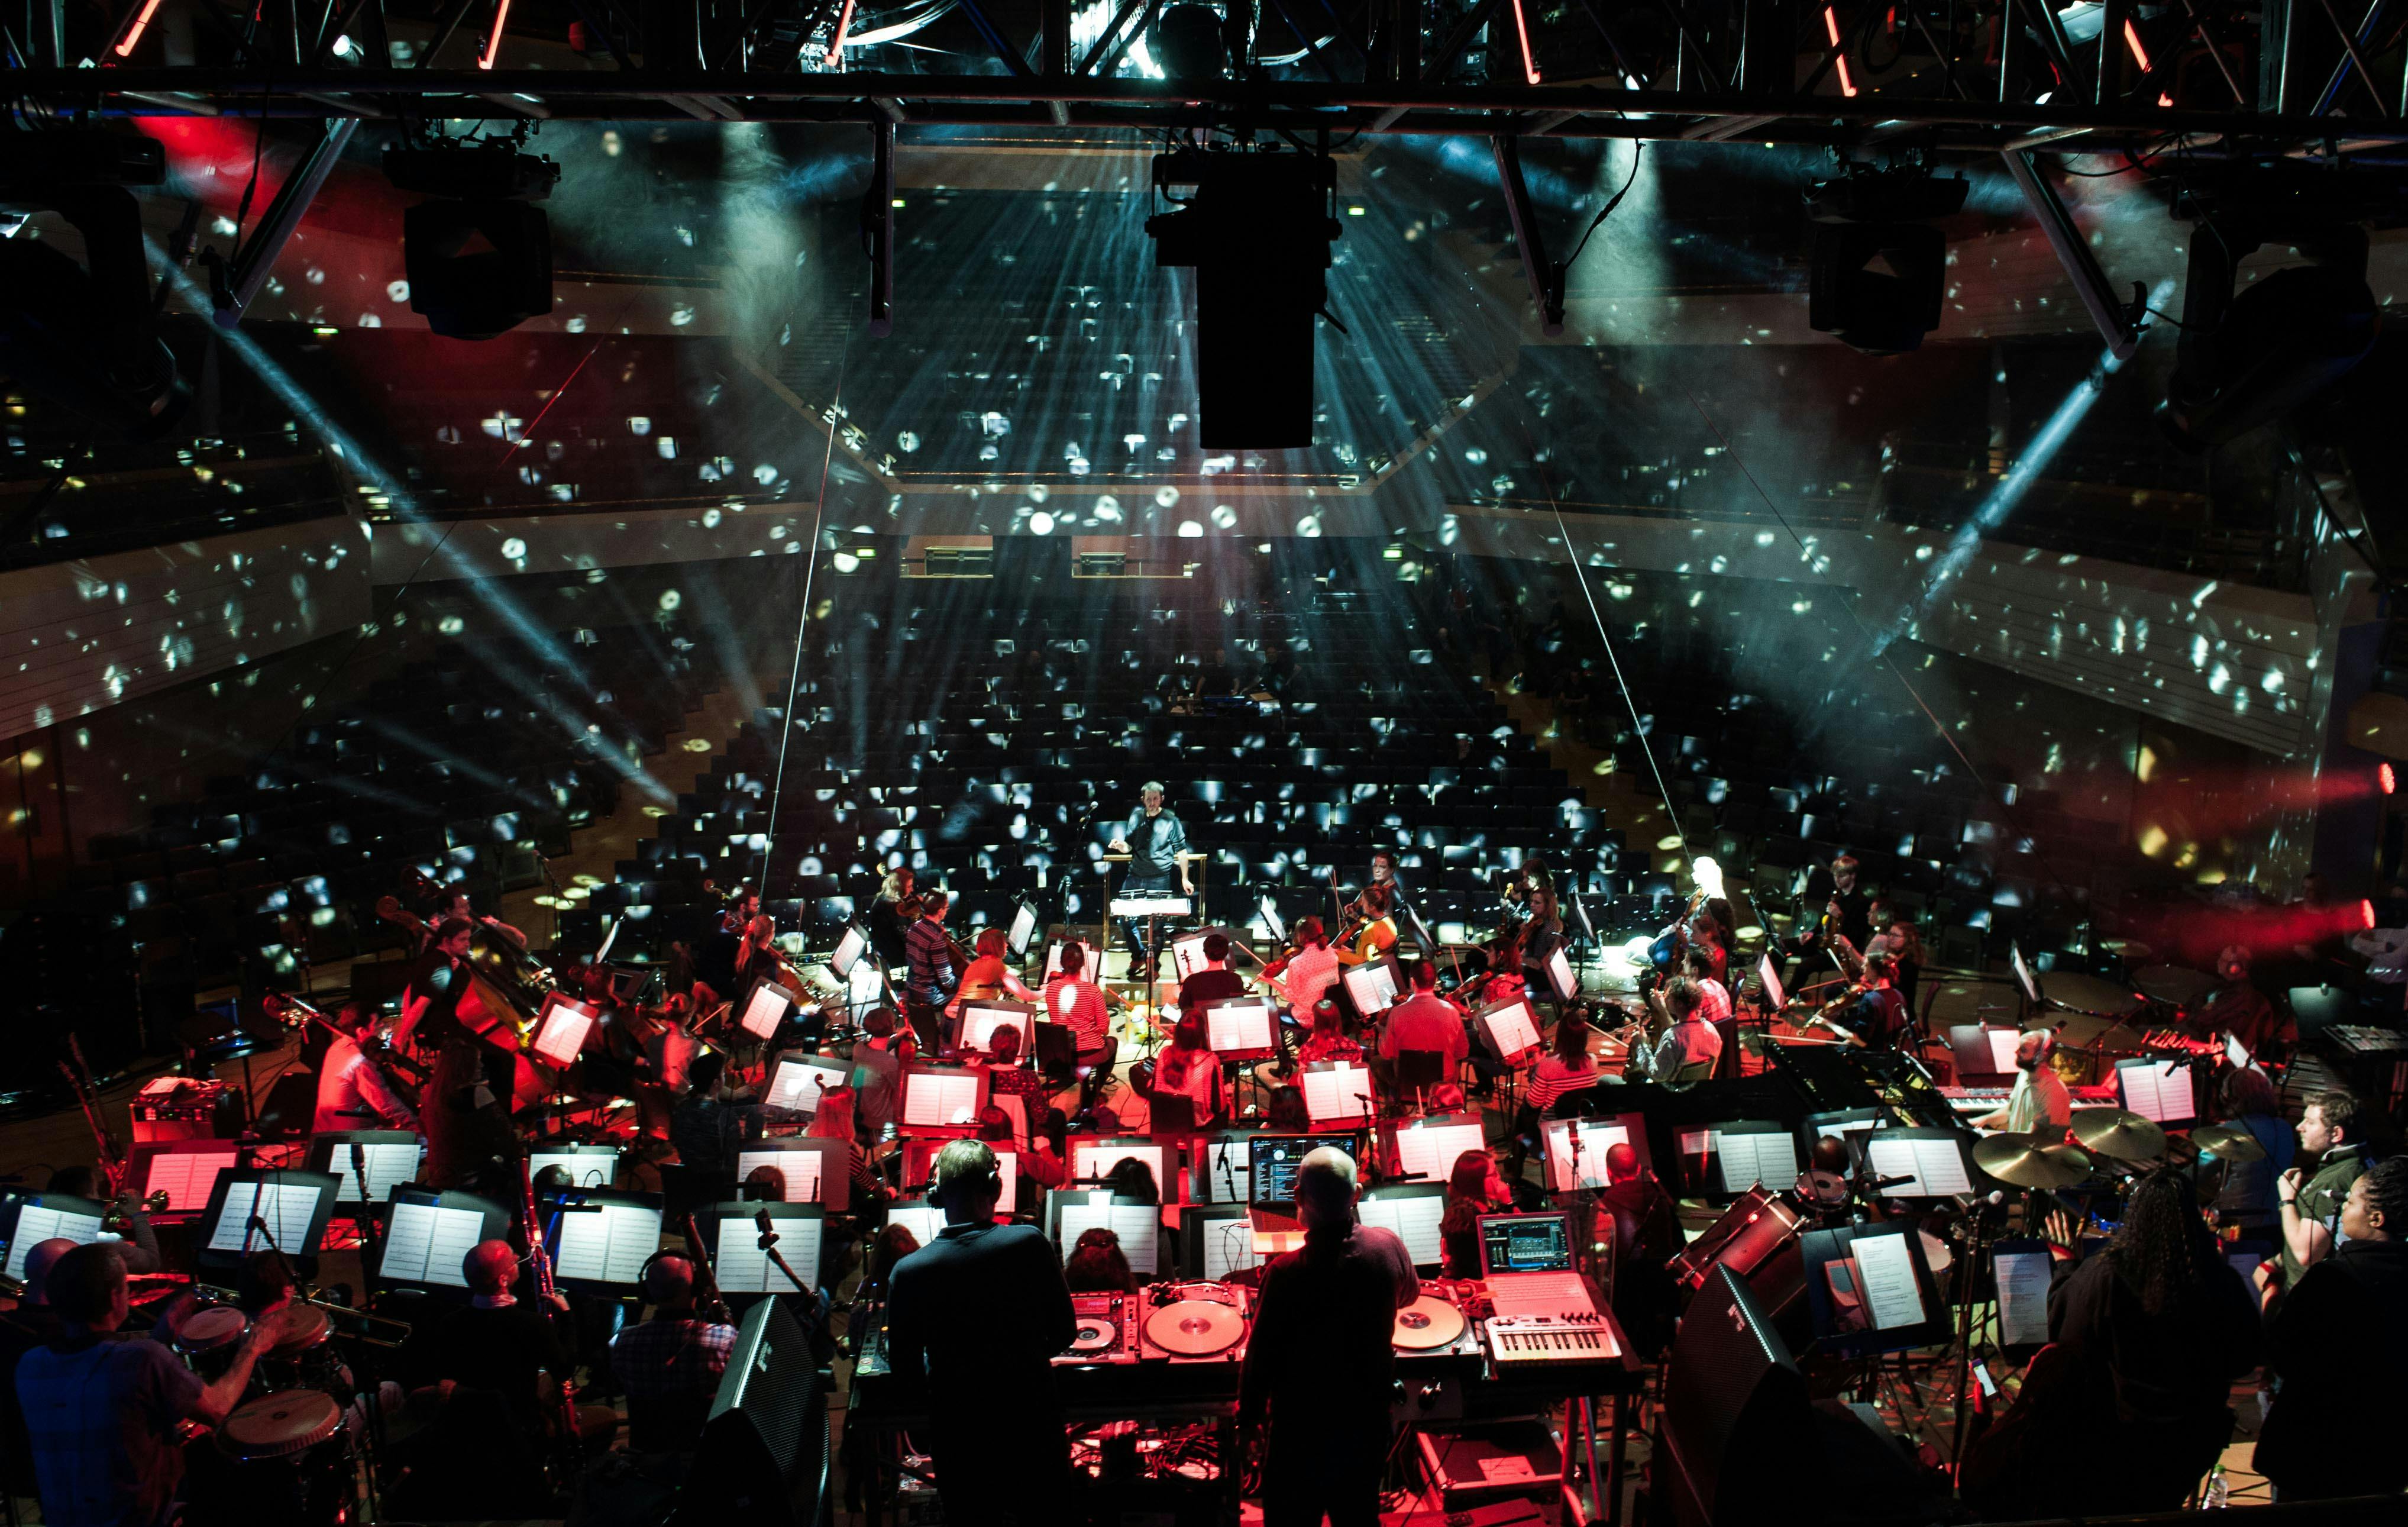 BBC ORCHESTRA WINS TOP CLASSICAL AWARD FOR RAVING